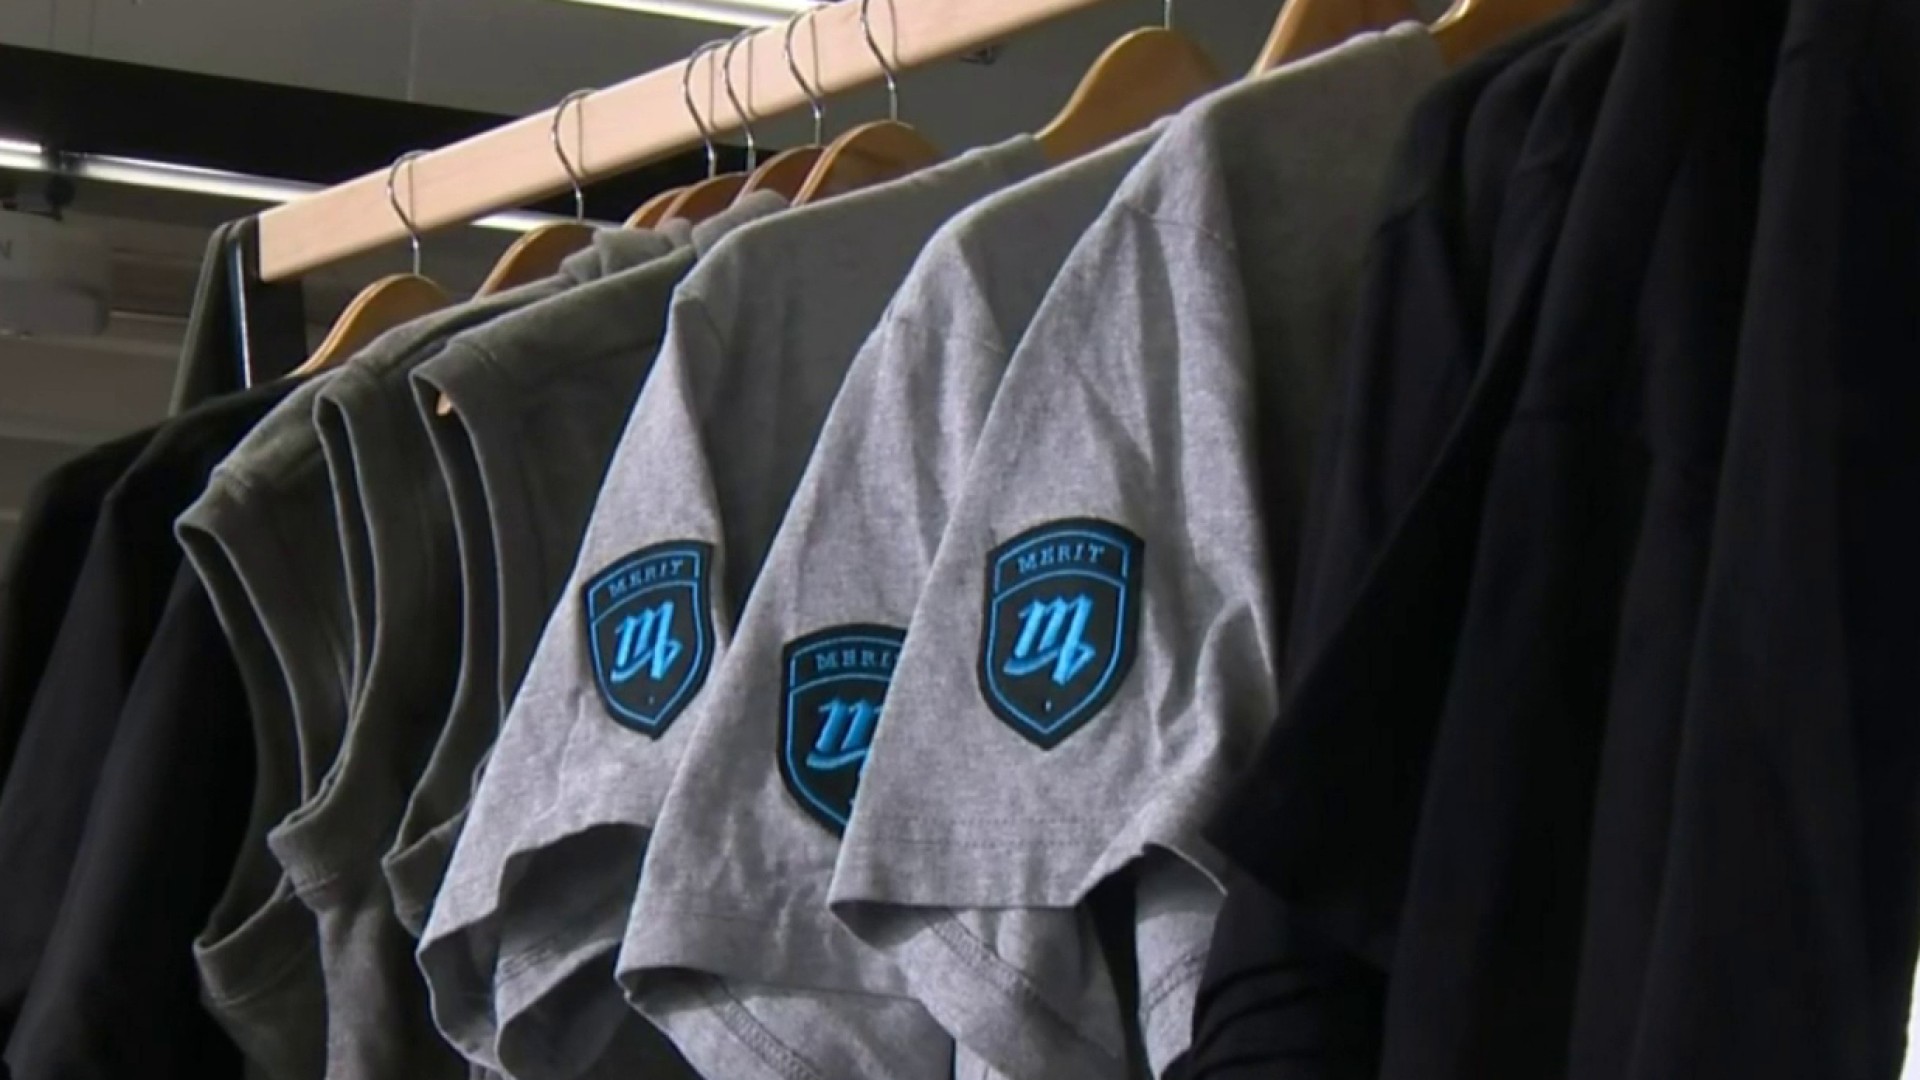 Lions QB partners with Detroit nonprofit to launch clothing collection